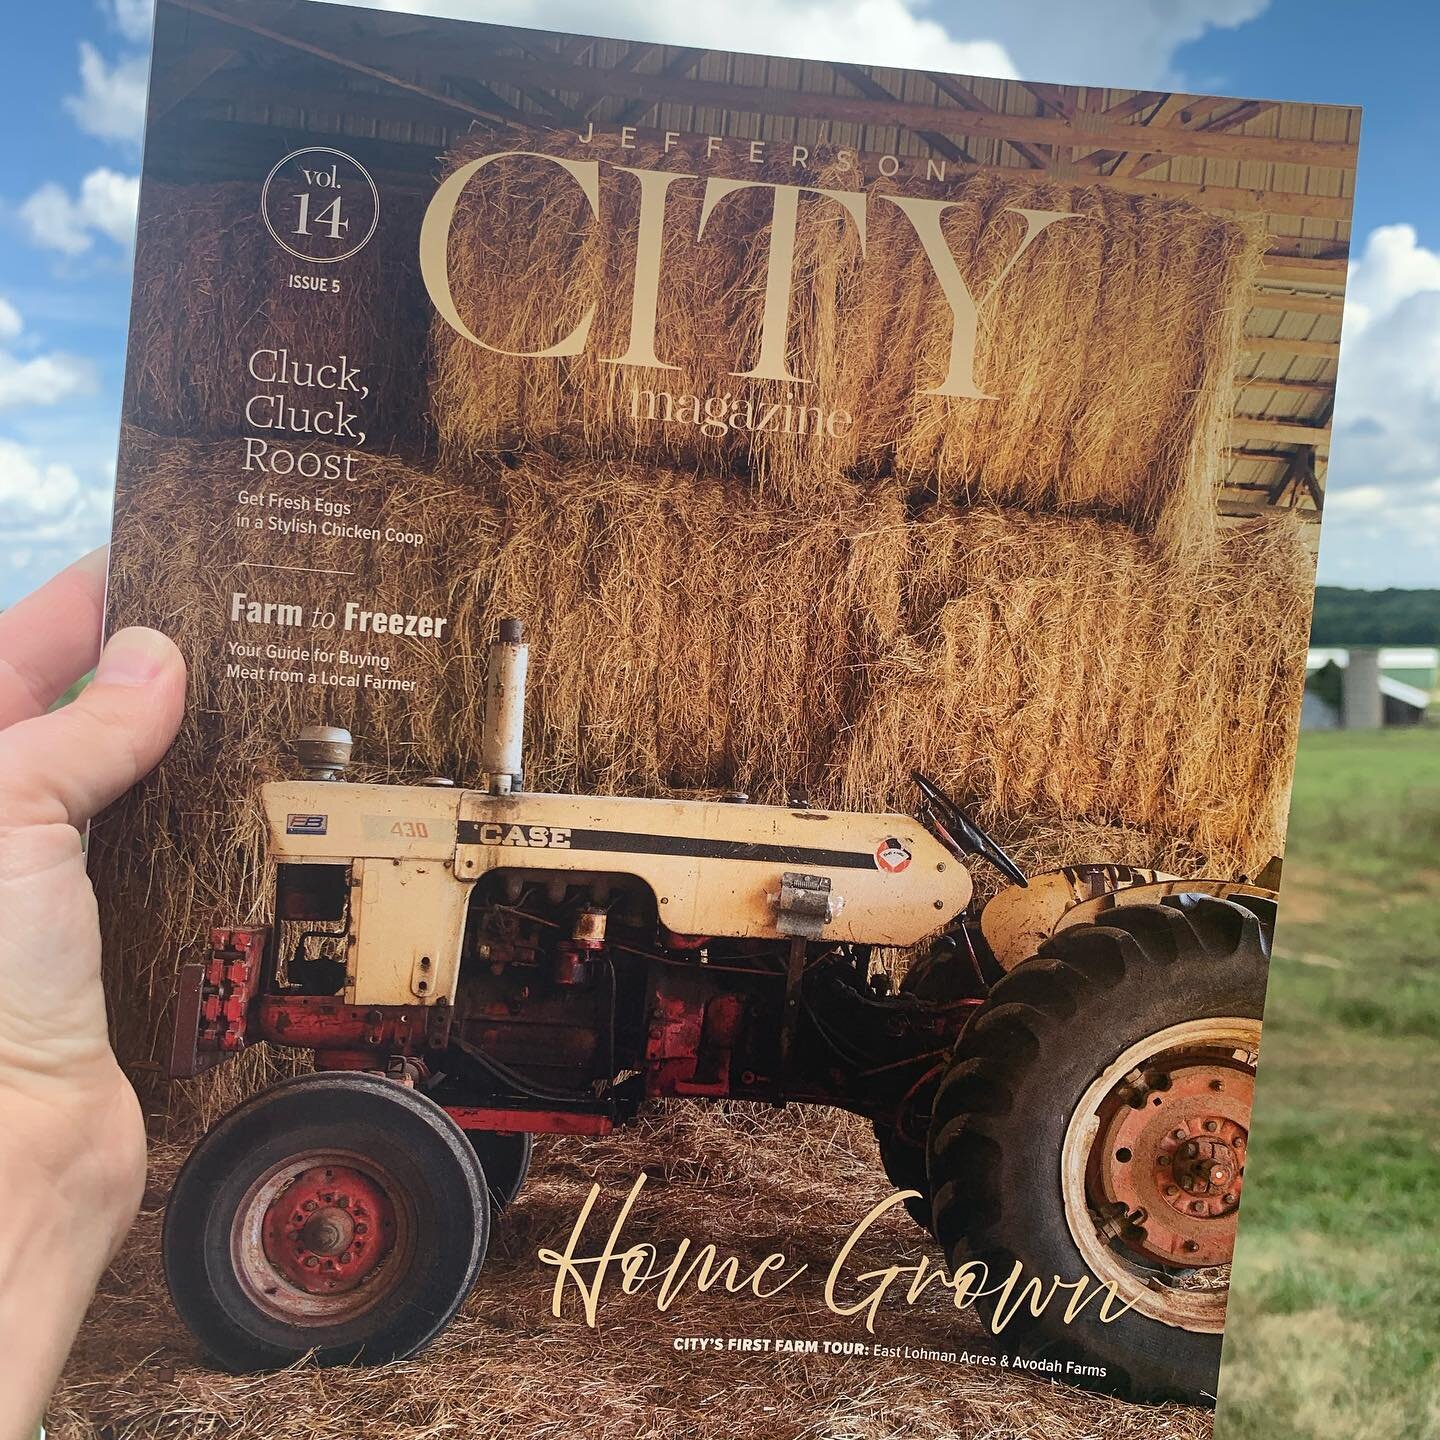 City Magazine is out! Our farm was interviewed as one of the first farms in their &lsquo;home grown&rsquo; issue and we couldn&rsquo;t be more excited! #jerseycows #a2 #knowyourfarmerknowyourfood